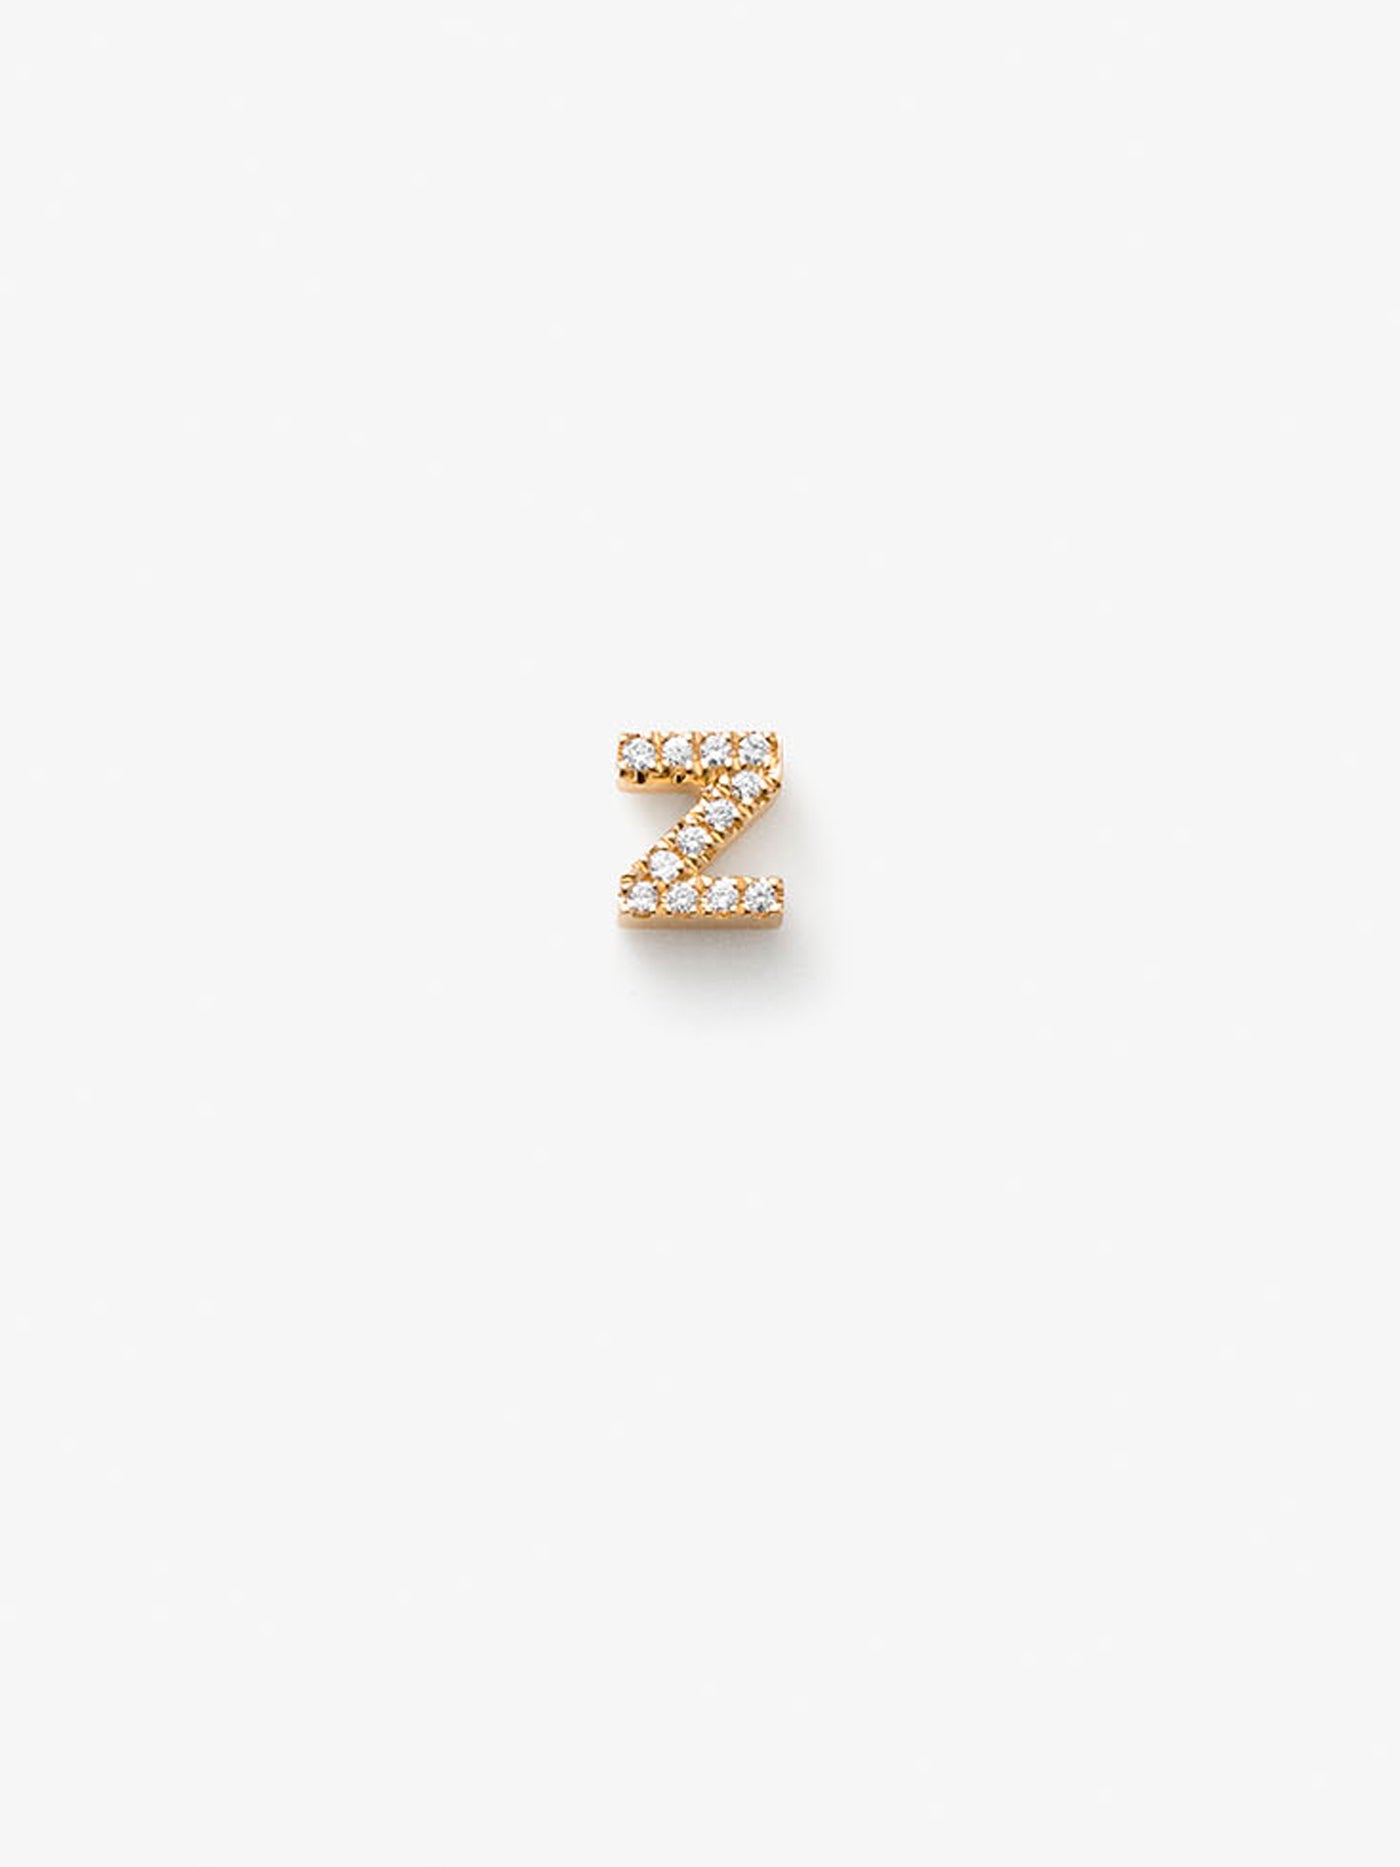 One Letter Z in Diamonds and 18k Gold